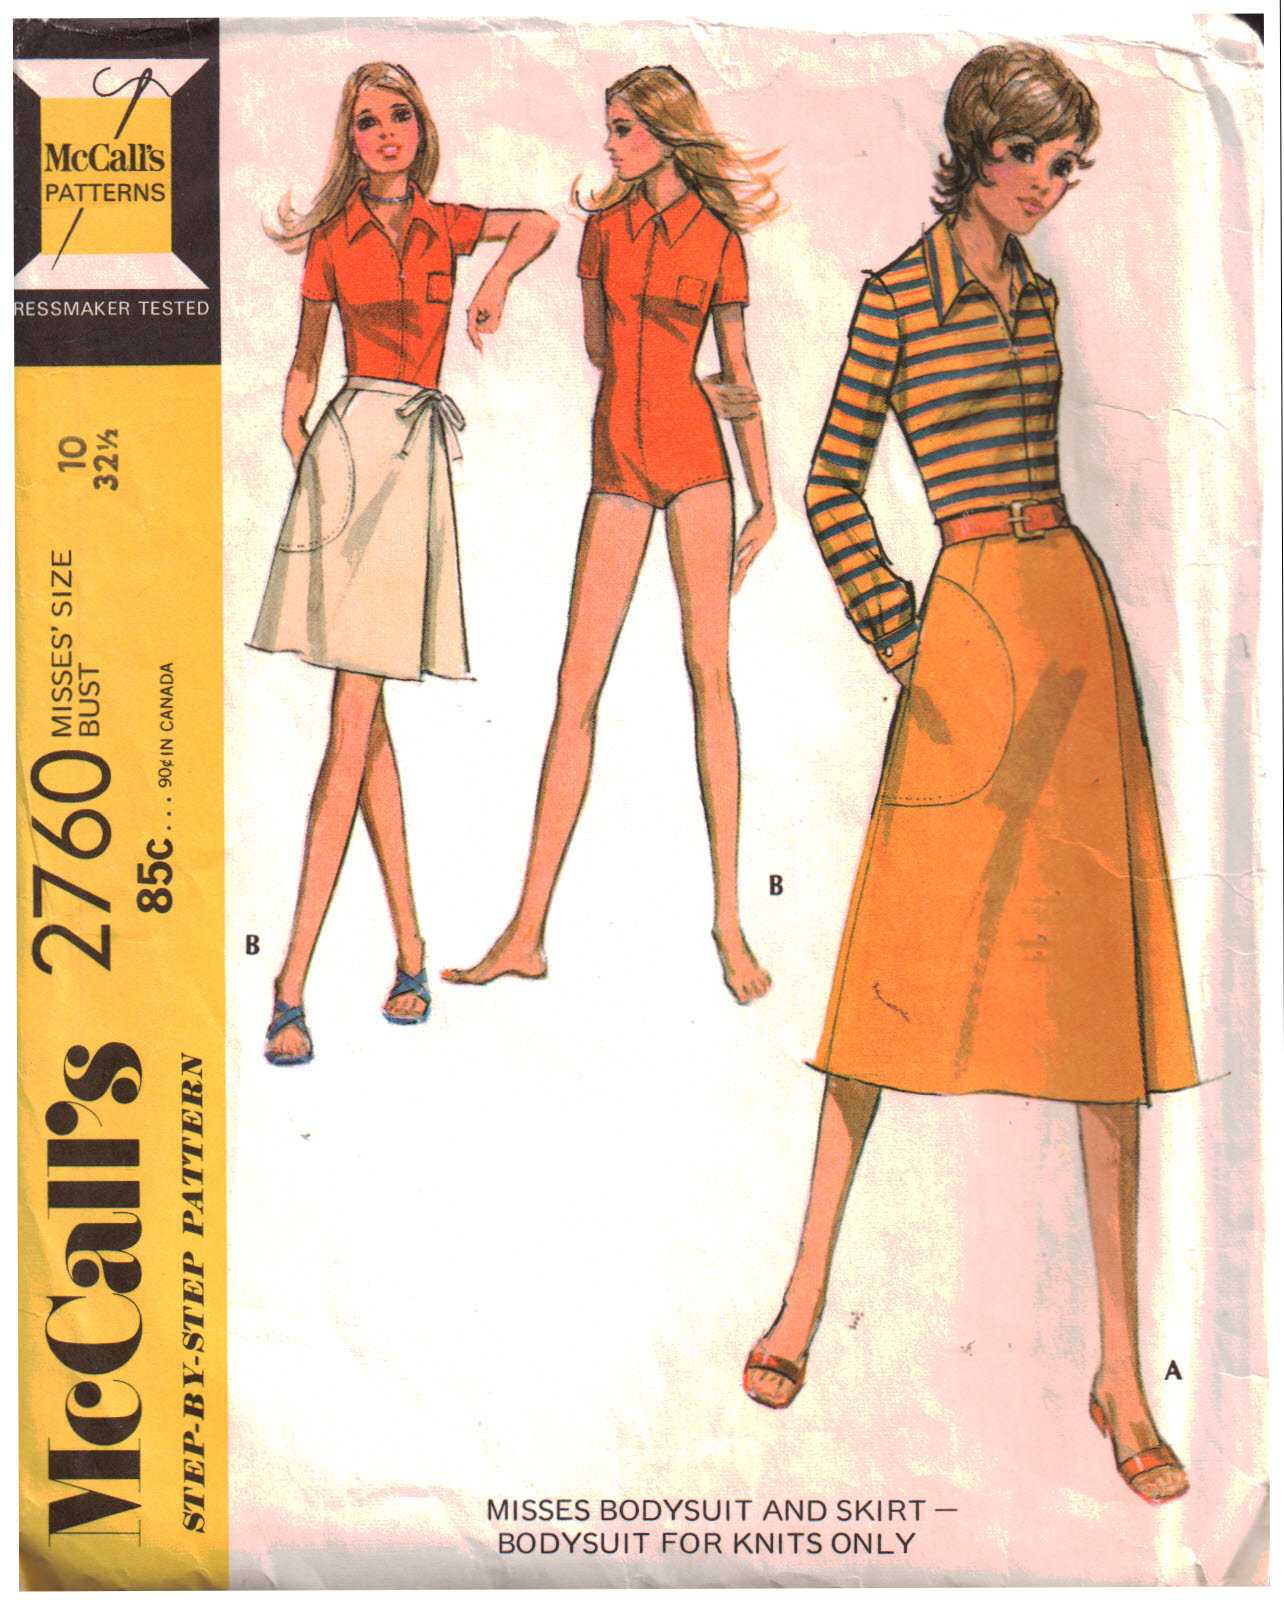 McCall's 2760 Bodysuit, Skirt Size: 10 Bust 32.5 Used Sewing Pattern